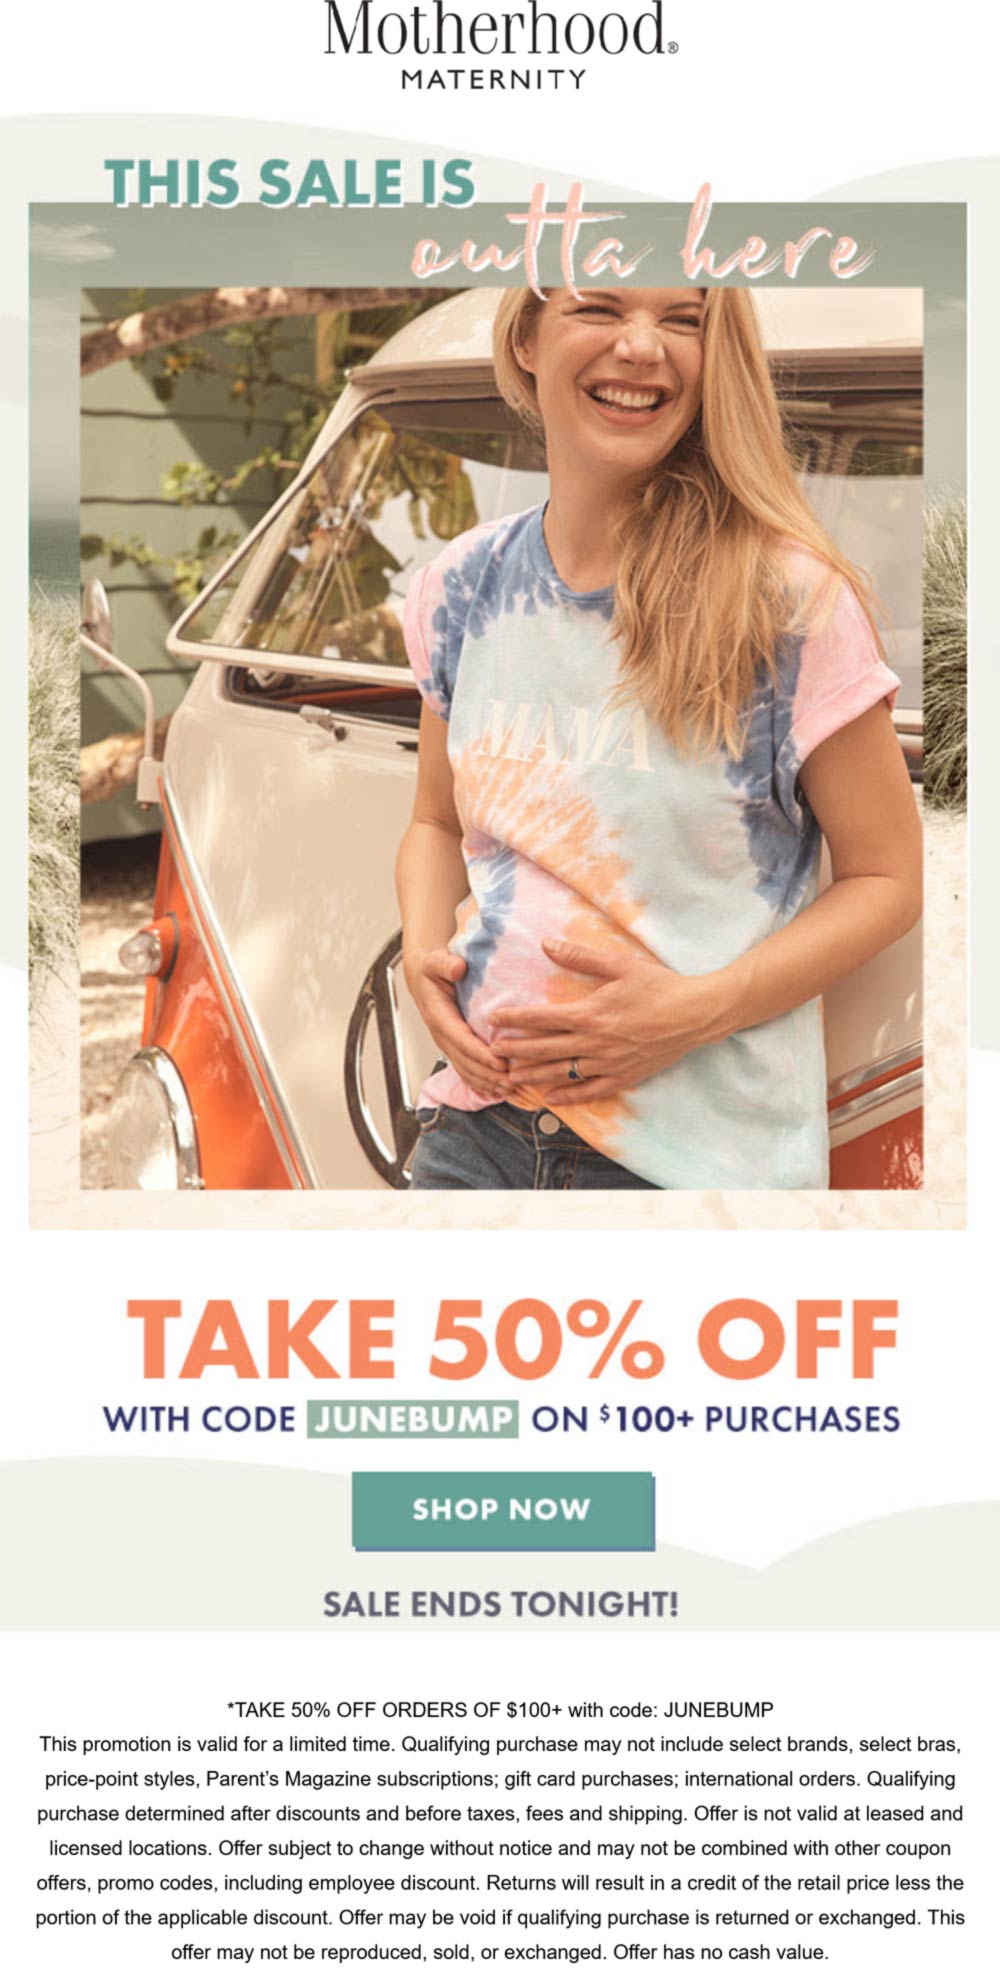 Motherhood Maternity stores Coupon  50% off $100 today at Motherhood Maternity via promo code JUNEBUMP #motherhoodmaternity 